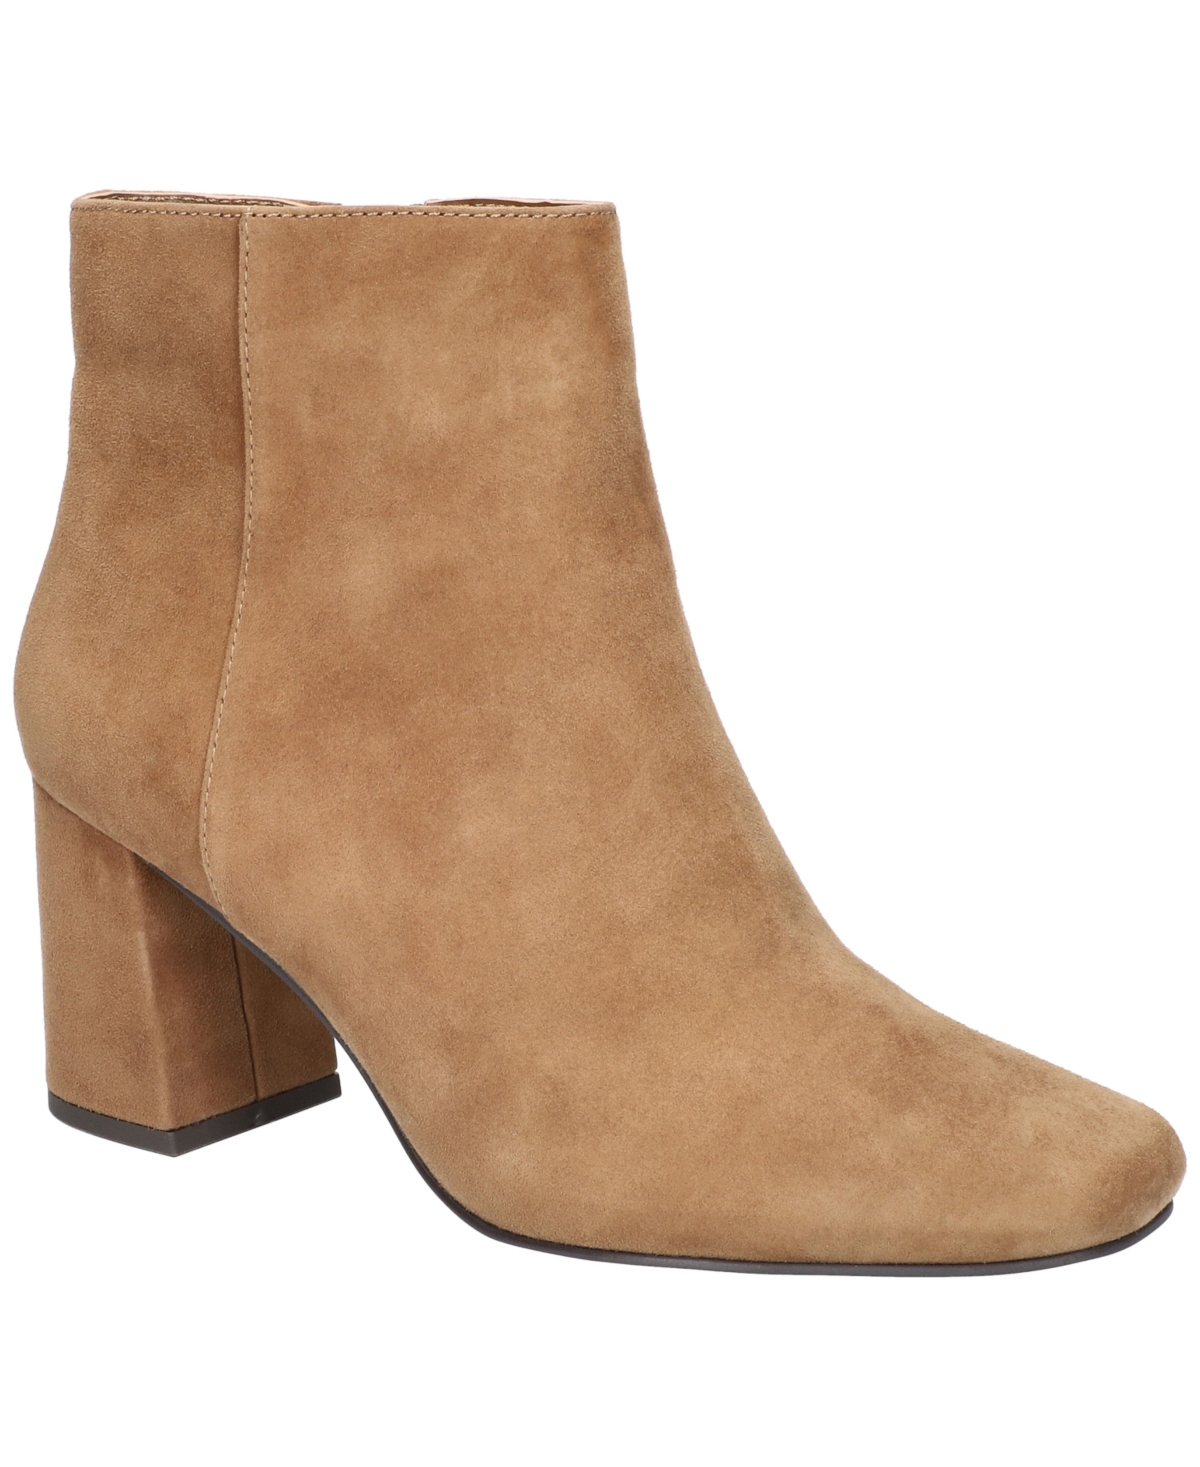 Women's Square Toe Ankle Boots - Cognac Suede Leather